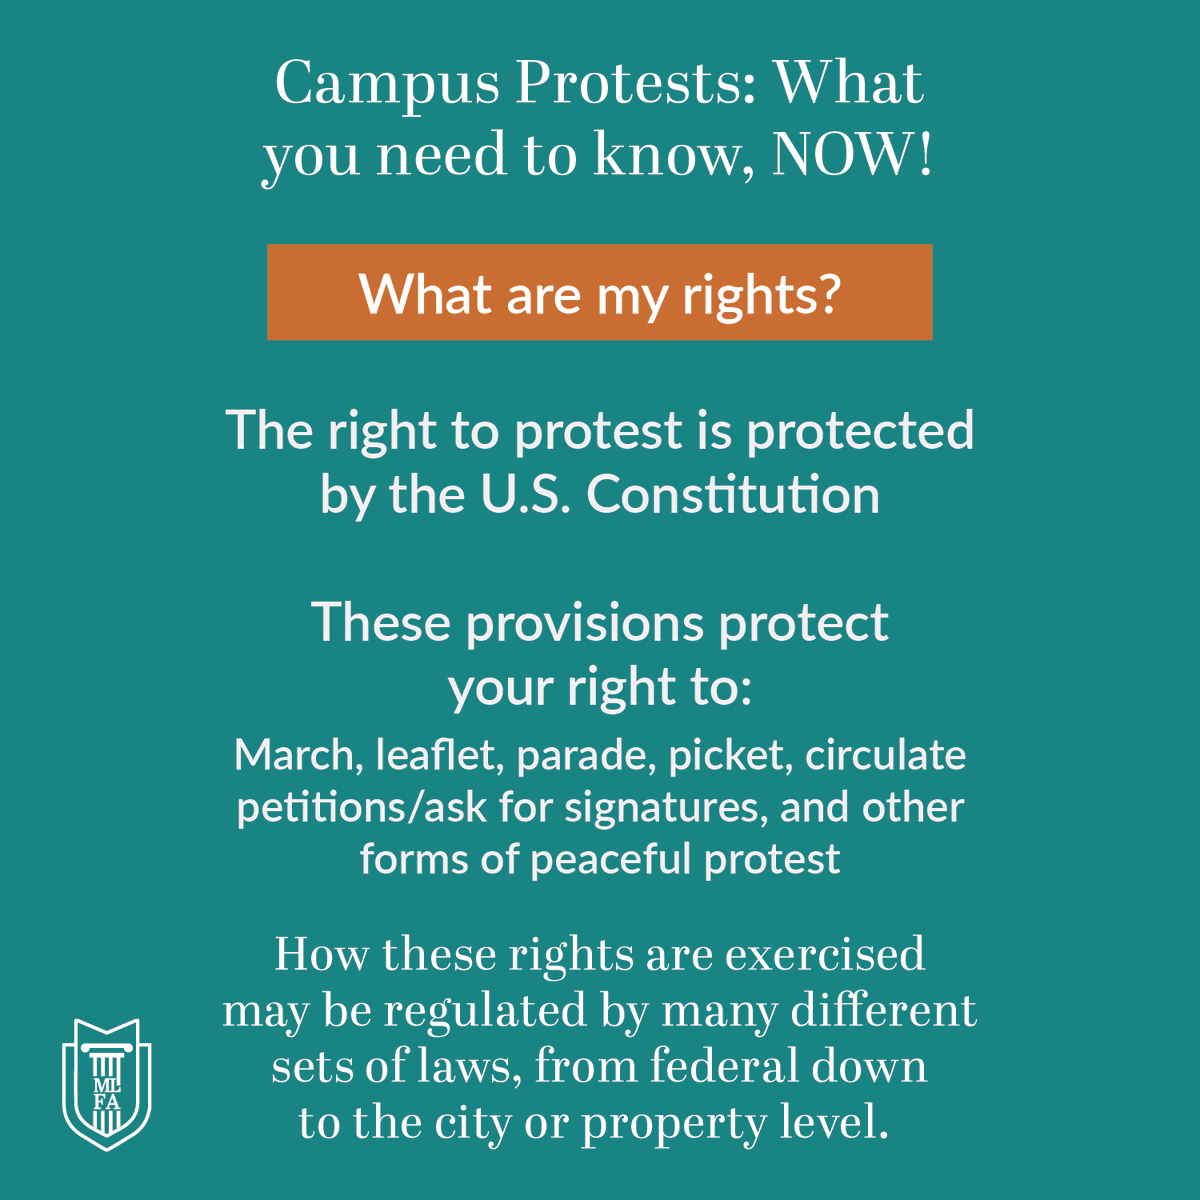 Are you or someone you know a college student protesting in anti-war demonstrations?​

Here are more tips for any student protesters across the nation looking for legal advice. ​

Visit MLFA.ORG for a hub of free videos and resources